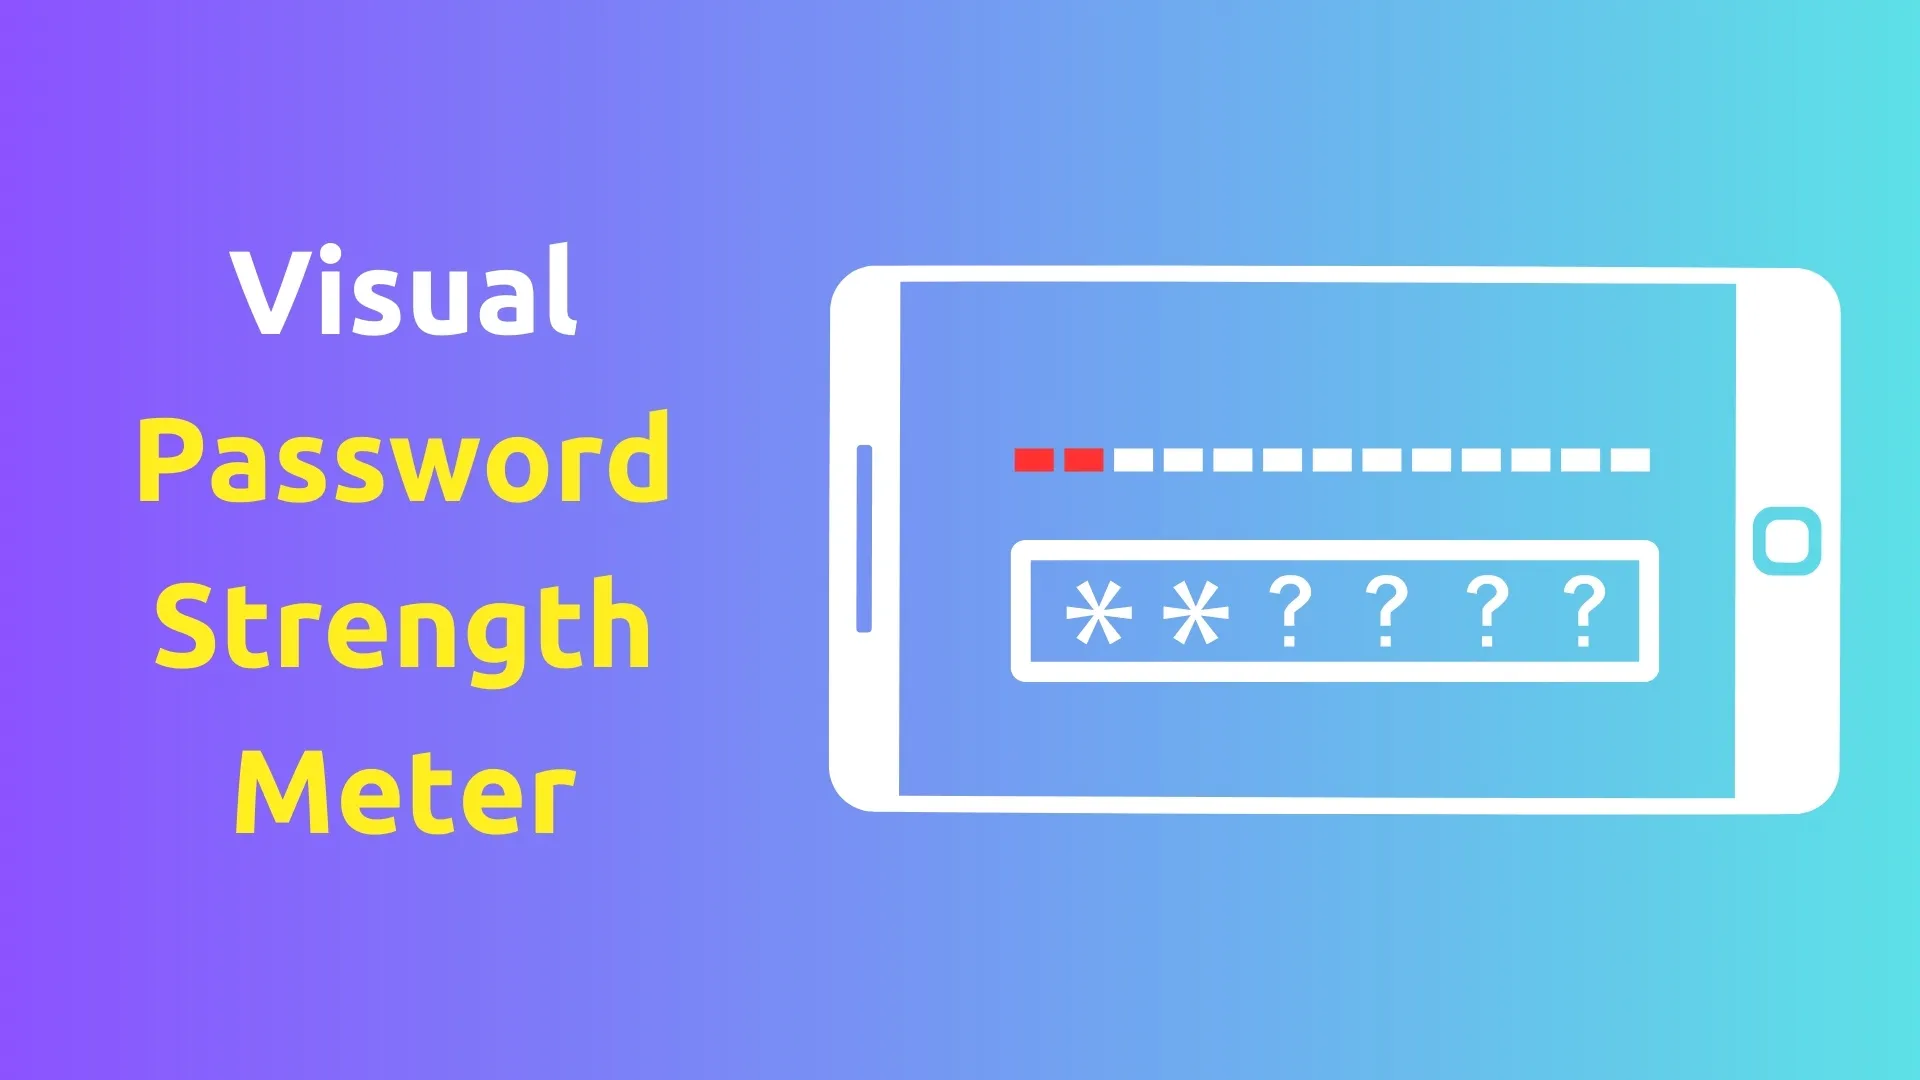 Visual Password Strength Meter in Android